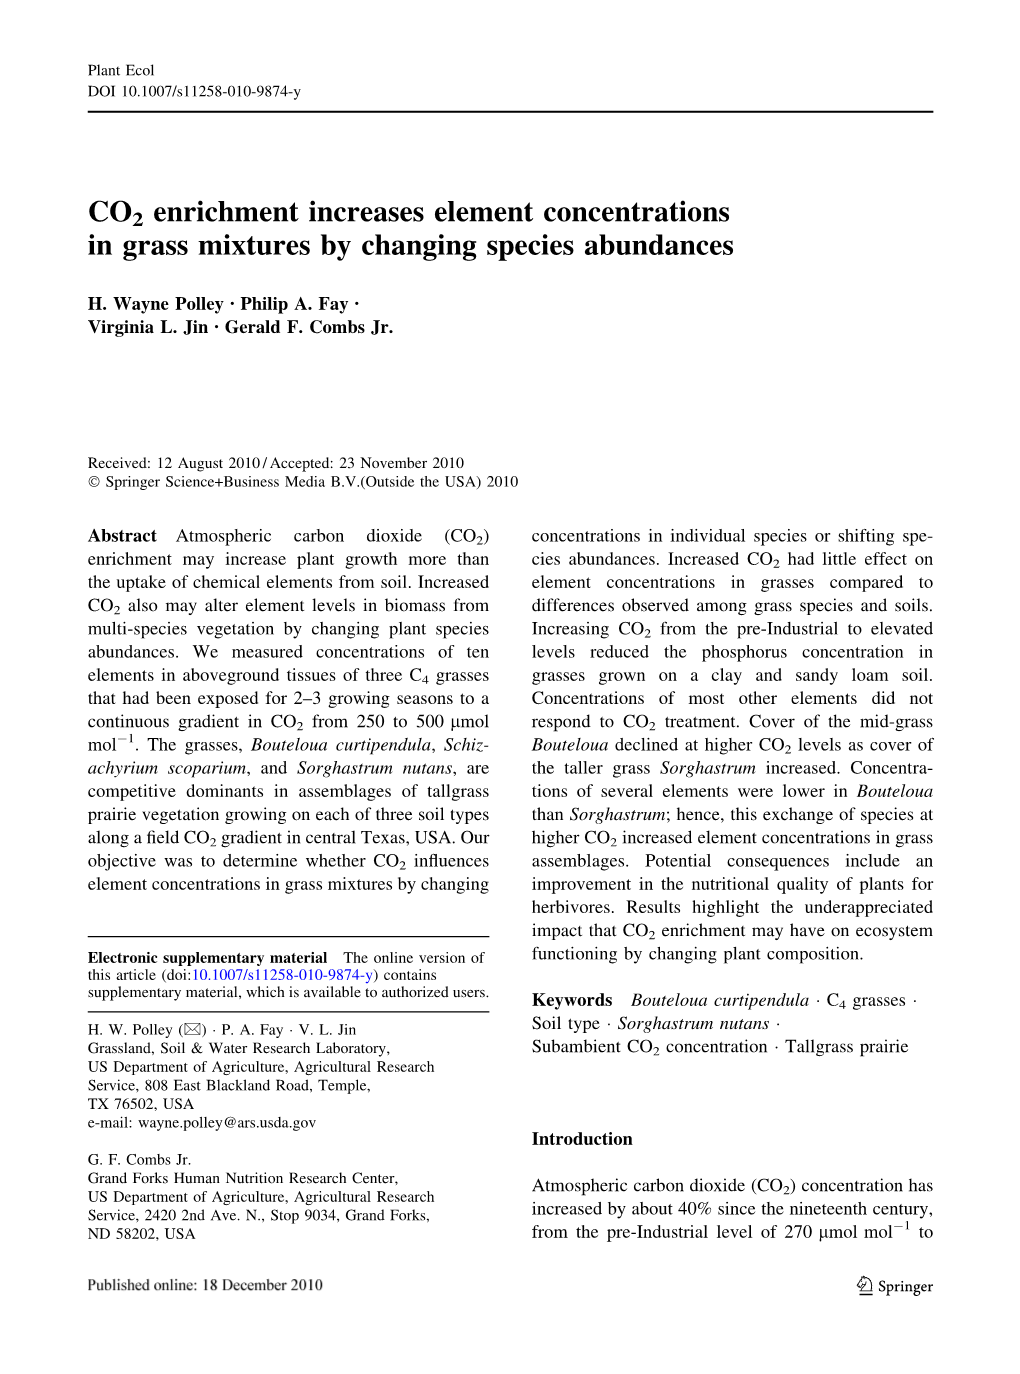 CO2 Enrichment Increases Element Concentrations in Grass Mixtures by Changing Species Abundances